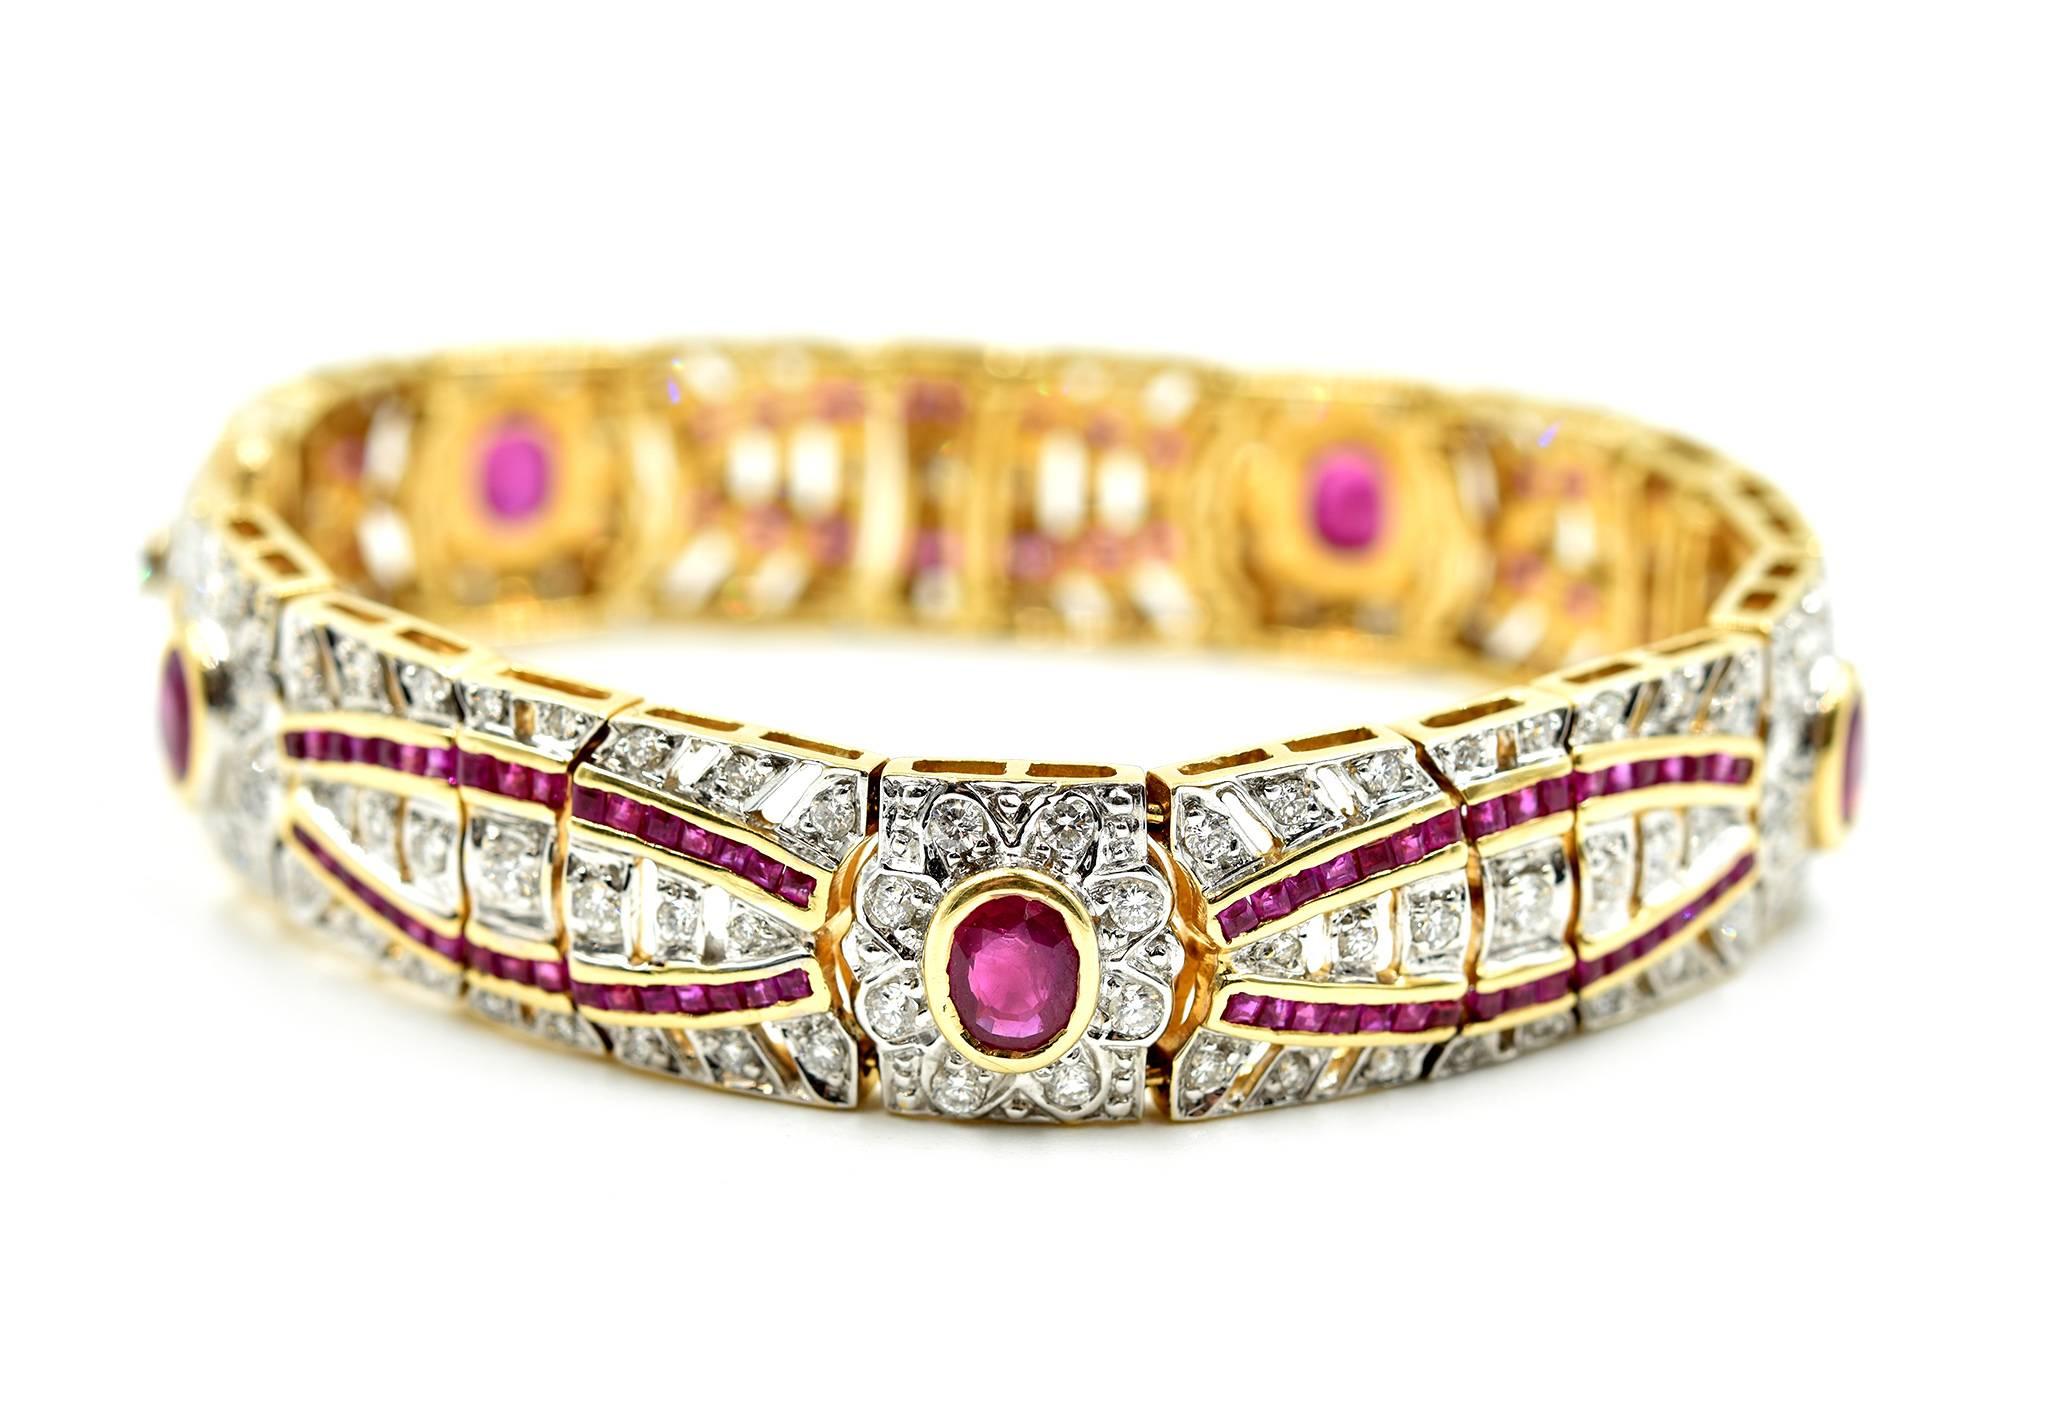 This bracelet is made in solid 18k yellow gold and set with rubies and diamonds. The diamonds have a total weight of 3.10 carats, and they are graded H-I in color and SI in clarity. The rubies have an additional weight of 9.75 carats—stunning! The